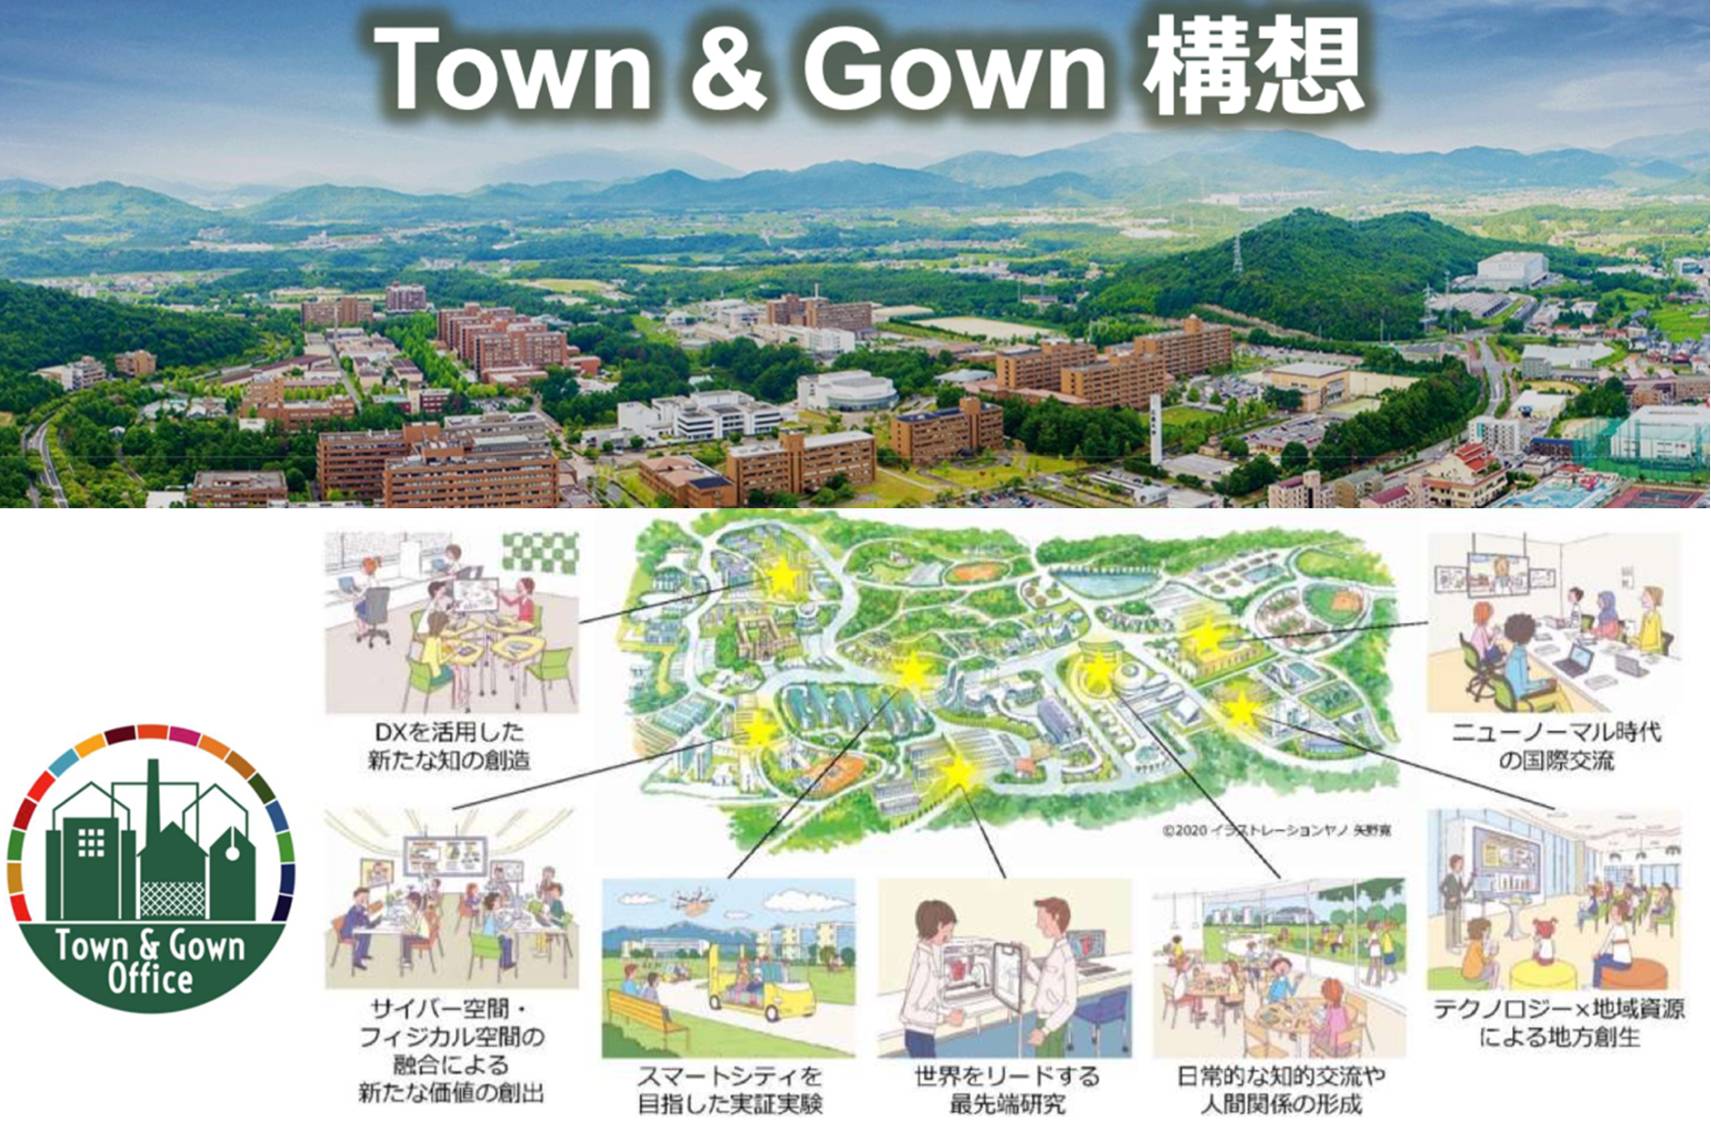 Town & Gown 構想